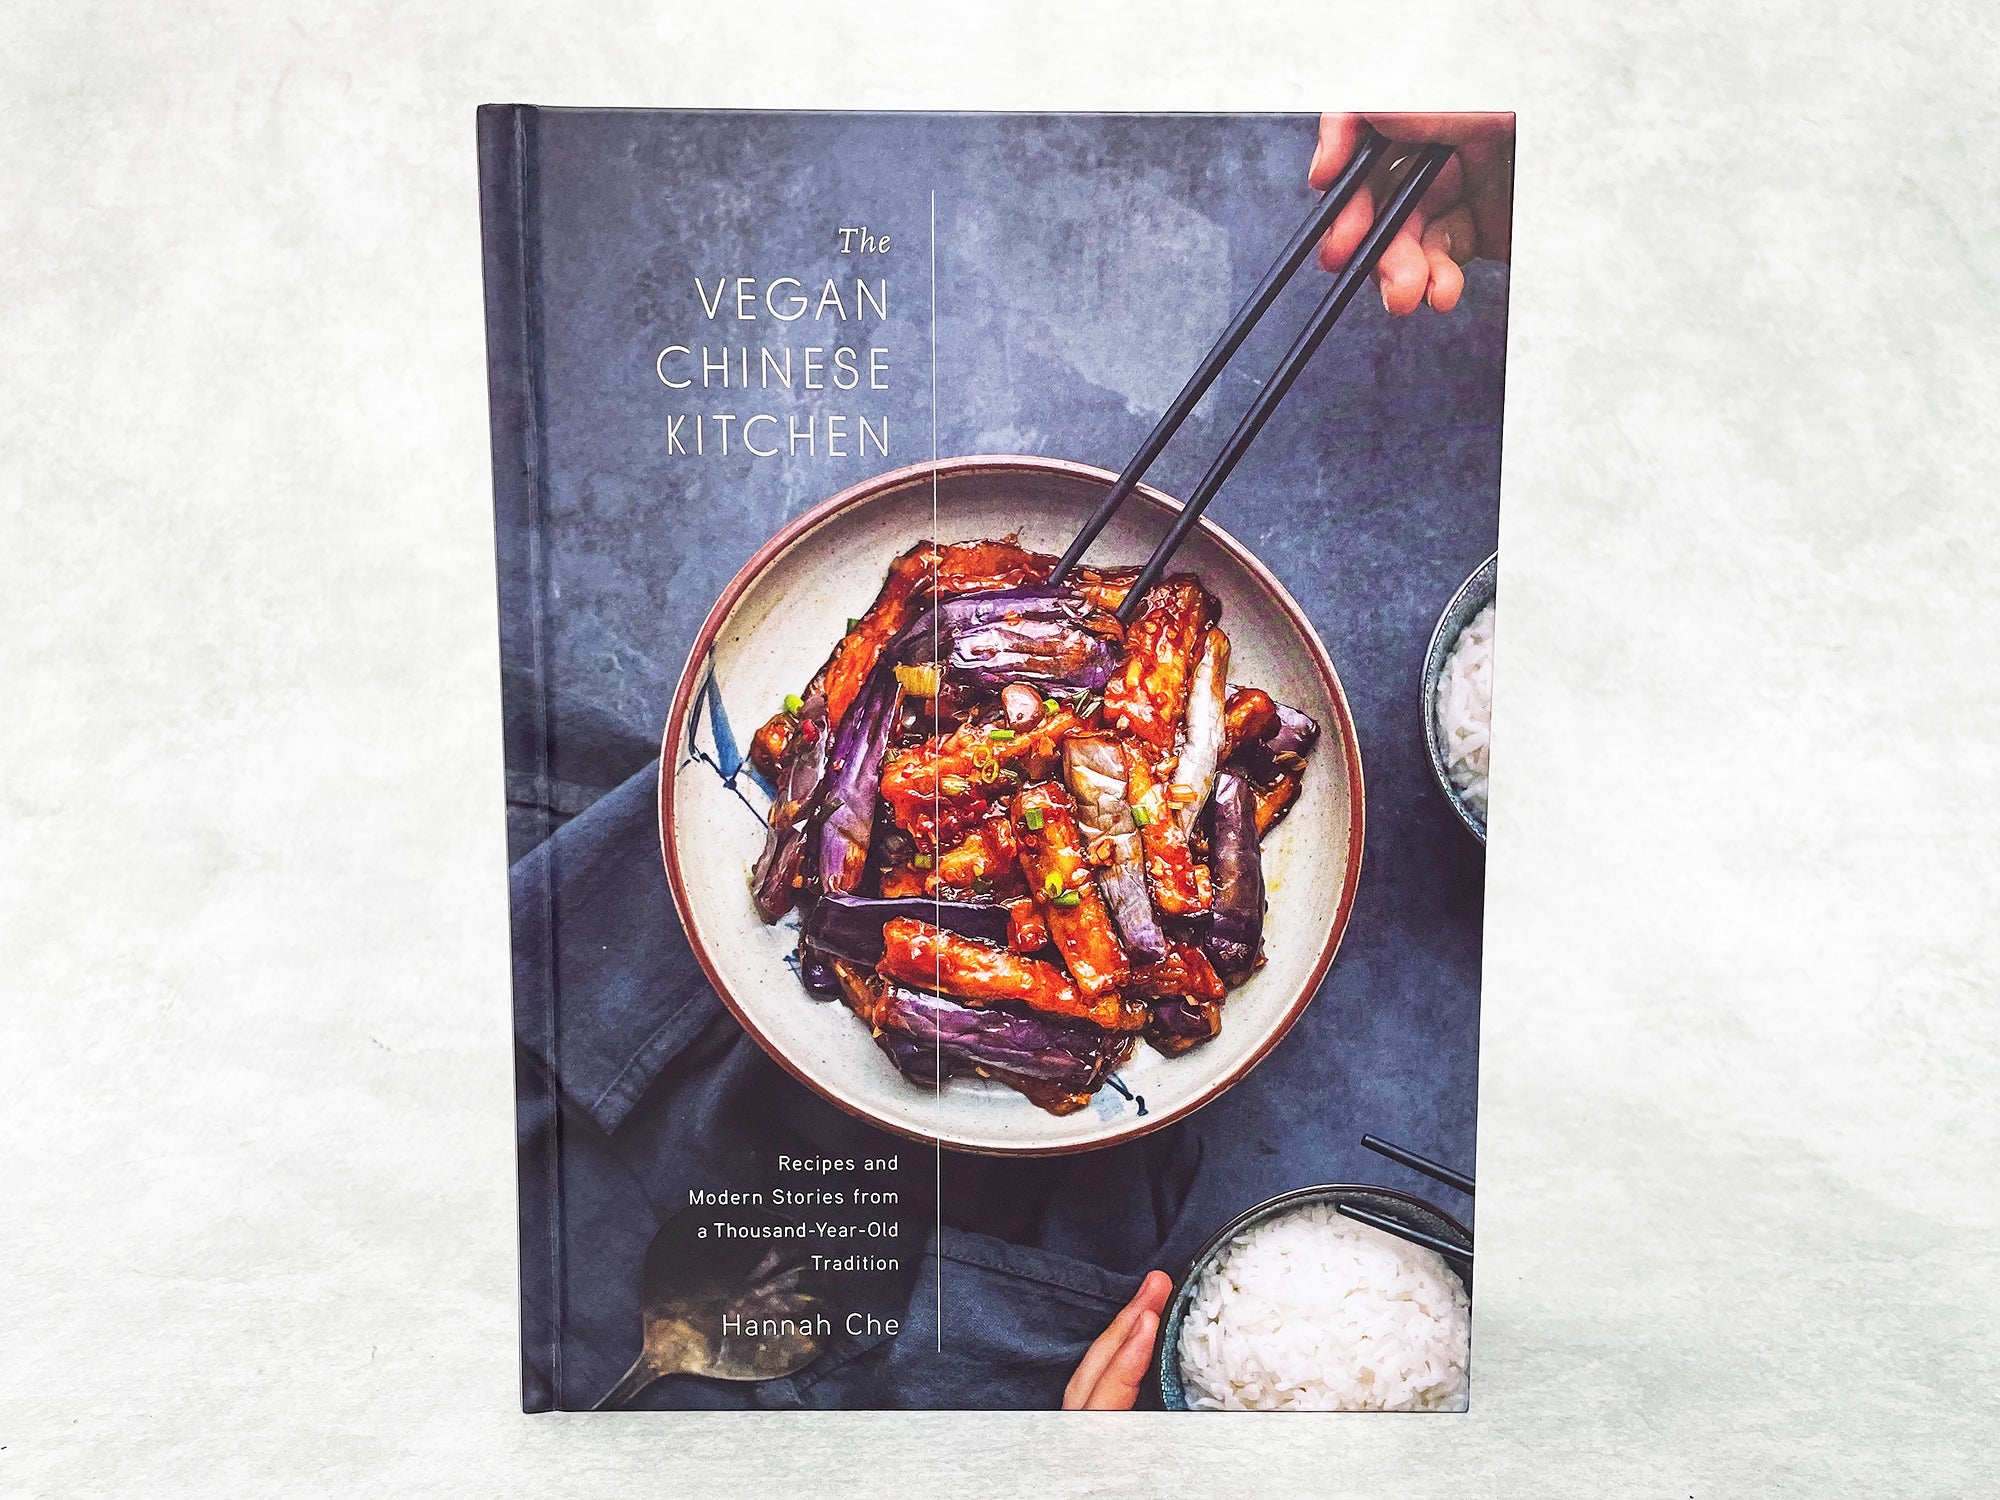 The Vegan Chinese Kitchen (Cookbook by Hannah Che)